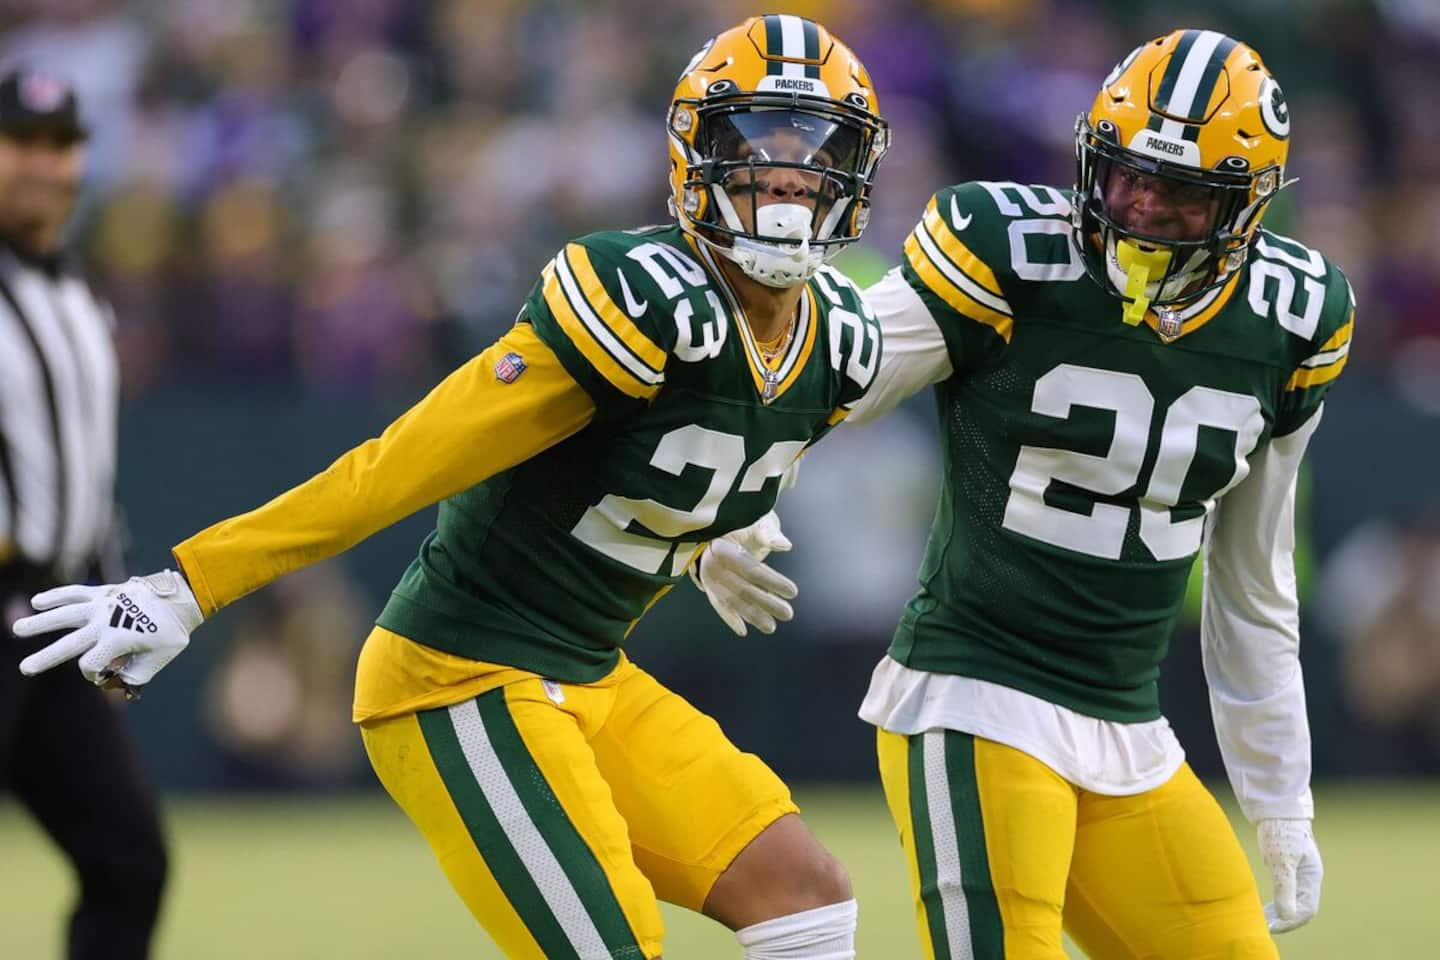 NFL: the Packers still very much alive